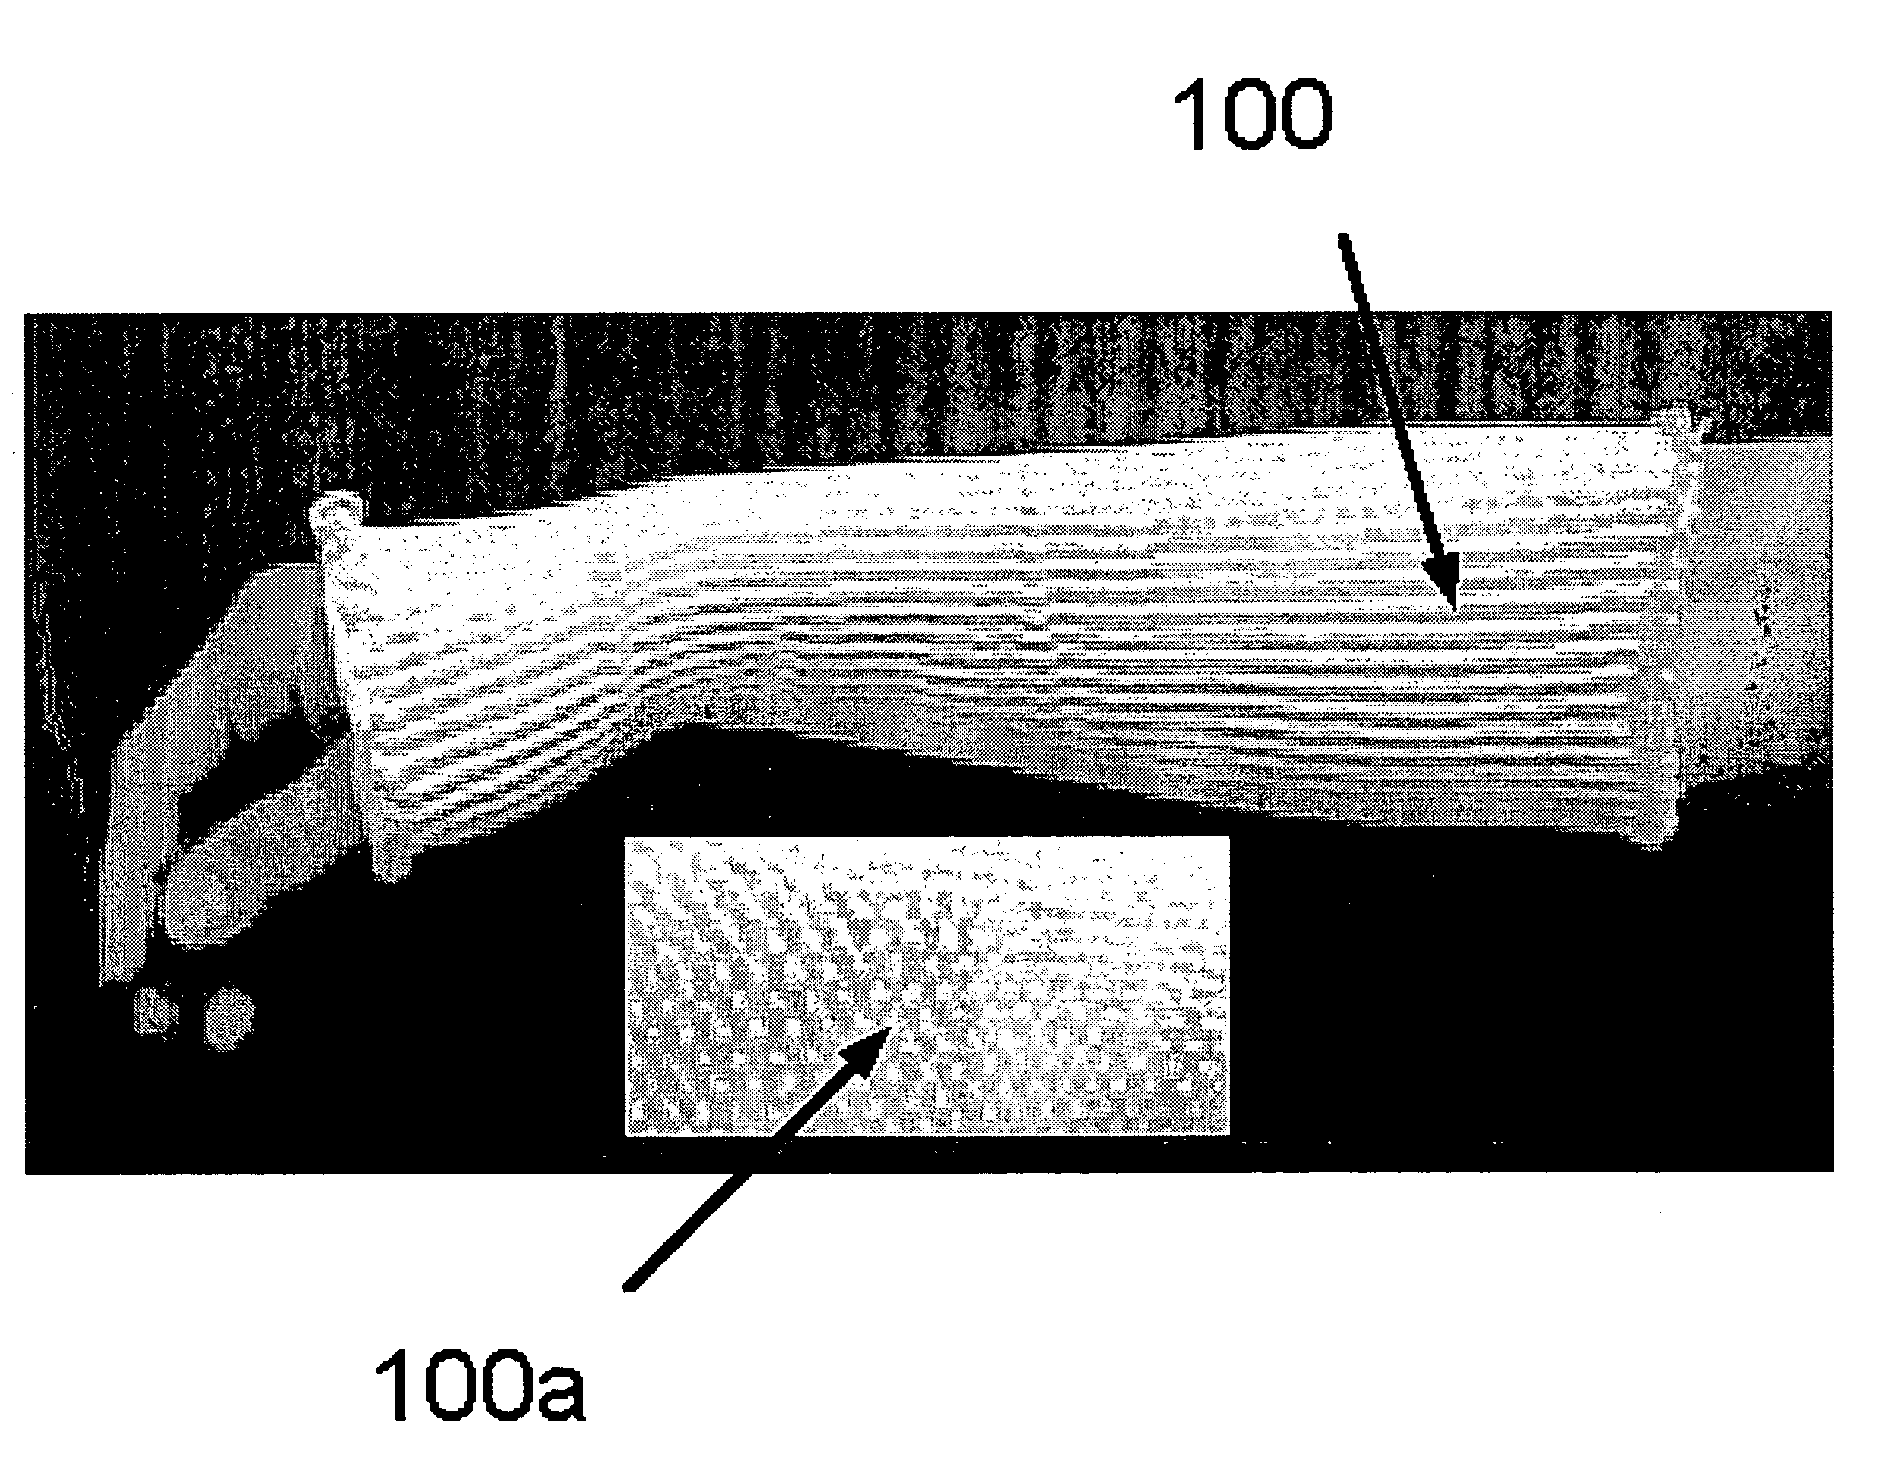 Sleeve-like knitted structure for use as a castliner